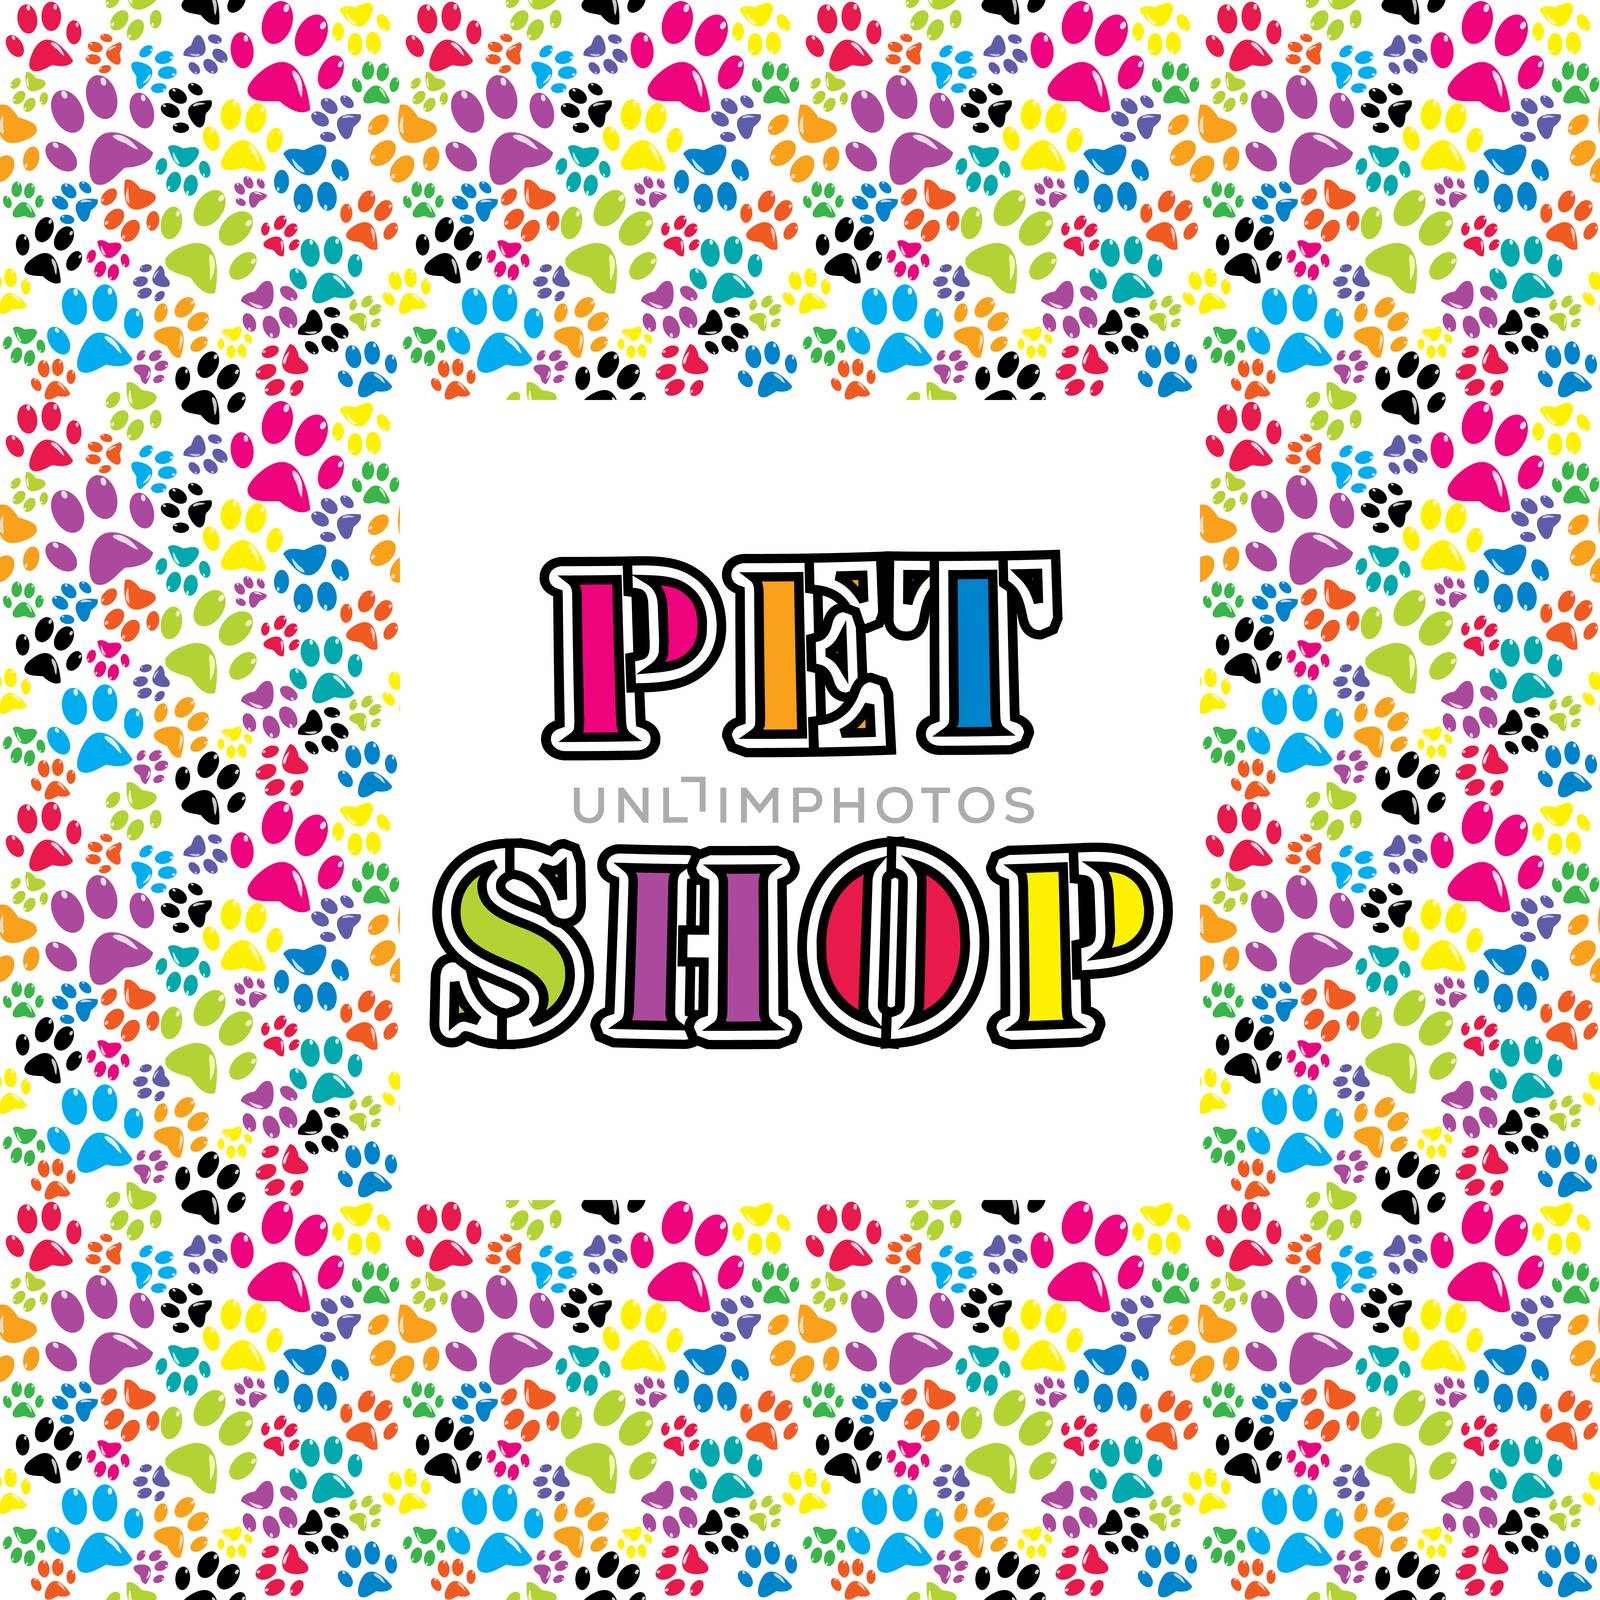 Pet shop background with colored paws